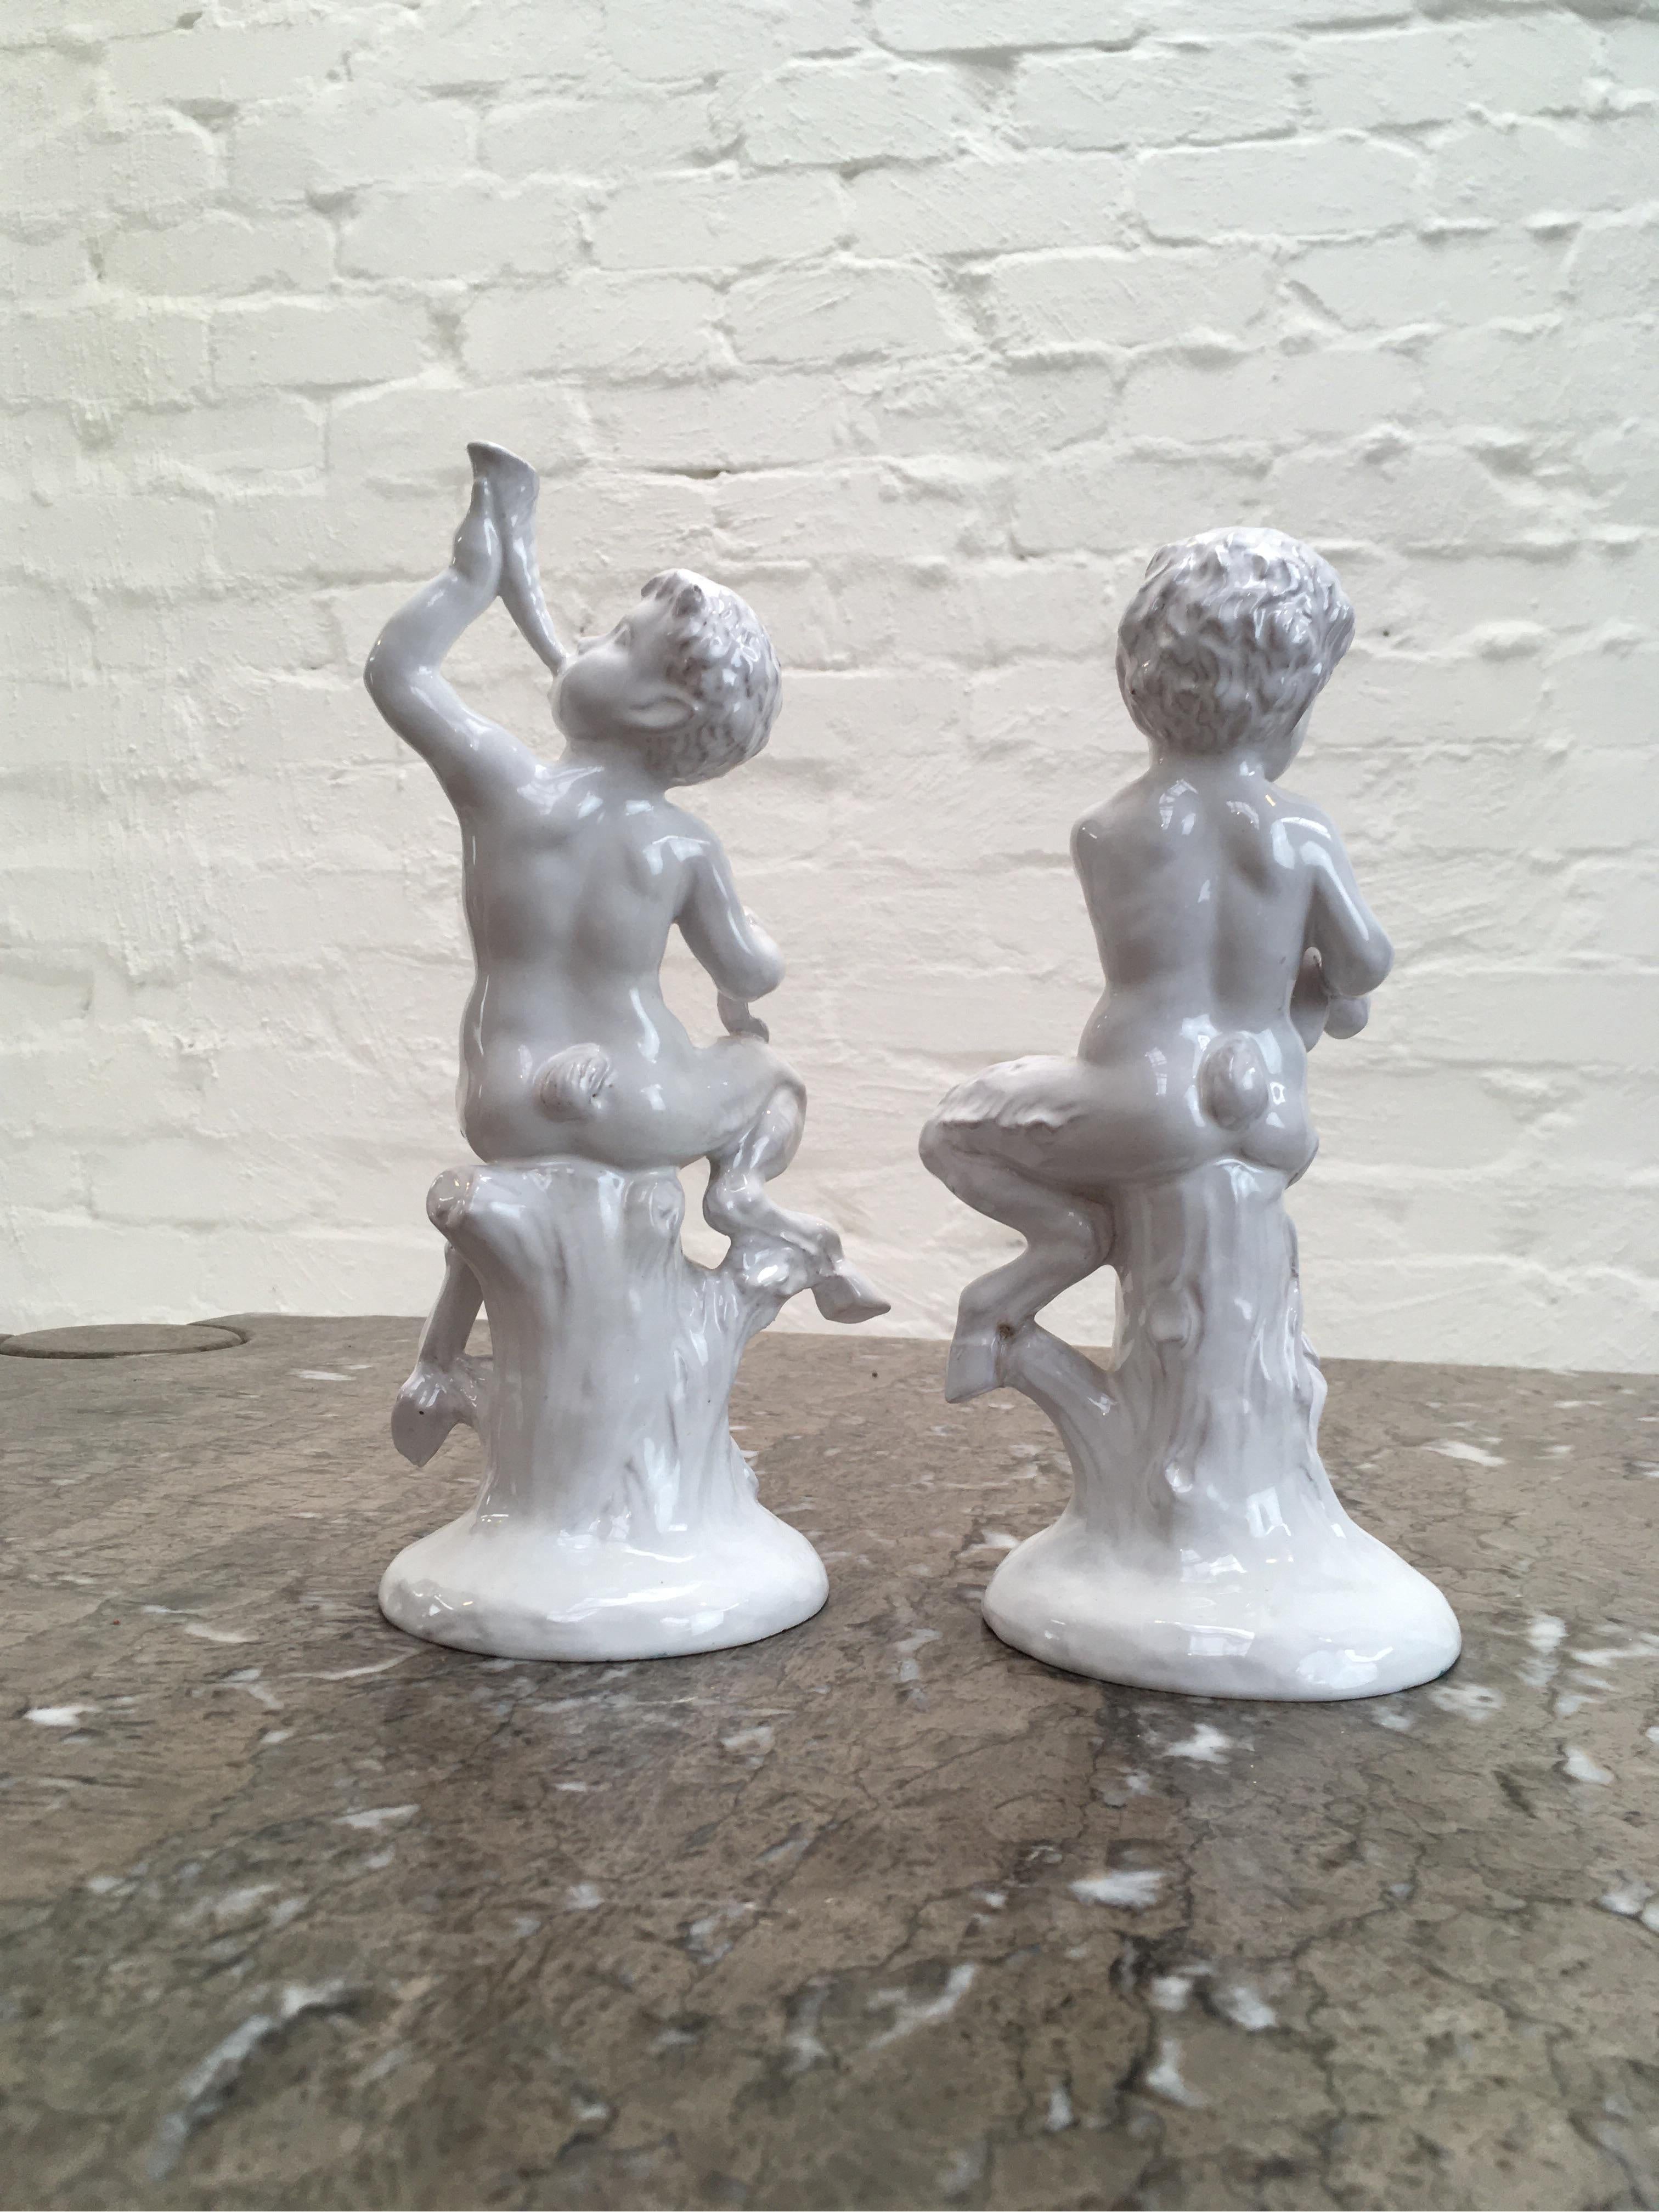 A pair of cherubic fauns, playing music. One sports a cupid's bow in one hand and blows a conch Horn. A quiver of cupid's arrows lies at his feet. The second faun accompanies on a bagpipe, his cheeks puffed and his eyes closed in concentration. They